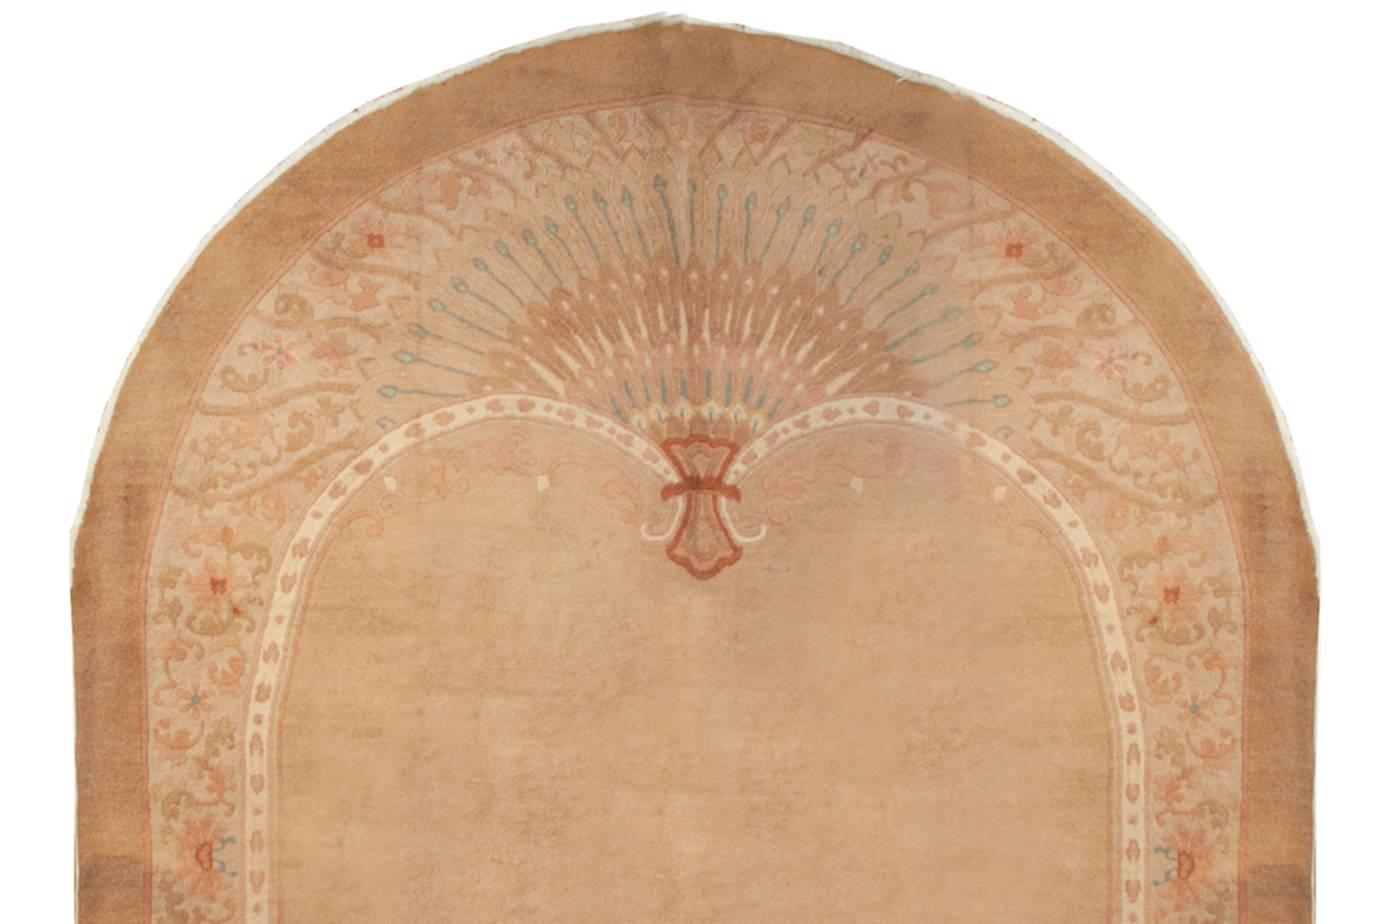 An unusual oval Chinese Art Deco rug with a fan design on each end, woven in pink, pale indigo, red and cream naturally dyed colors. The center is double-lobed kidney shape with an open field of natural color wool.